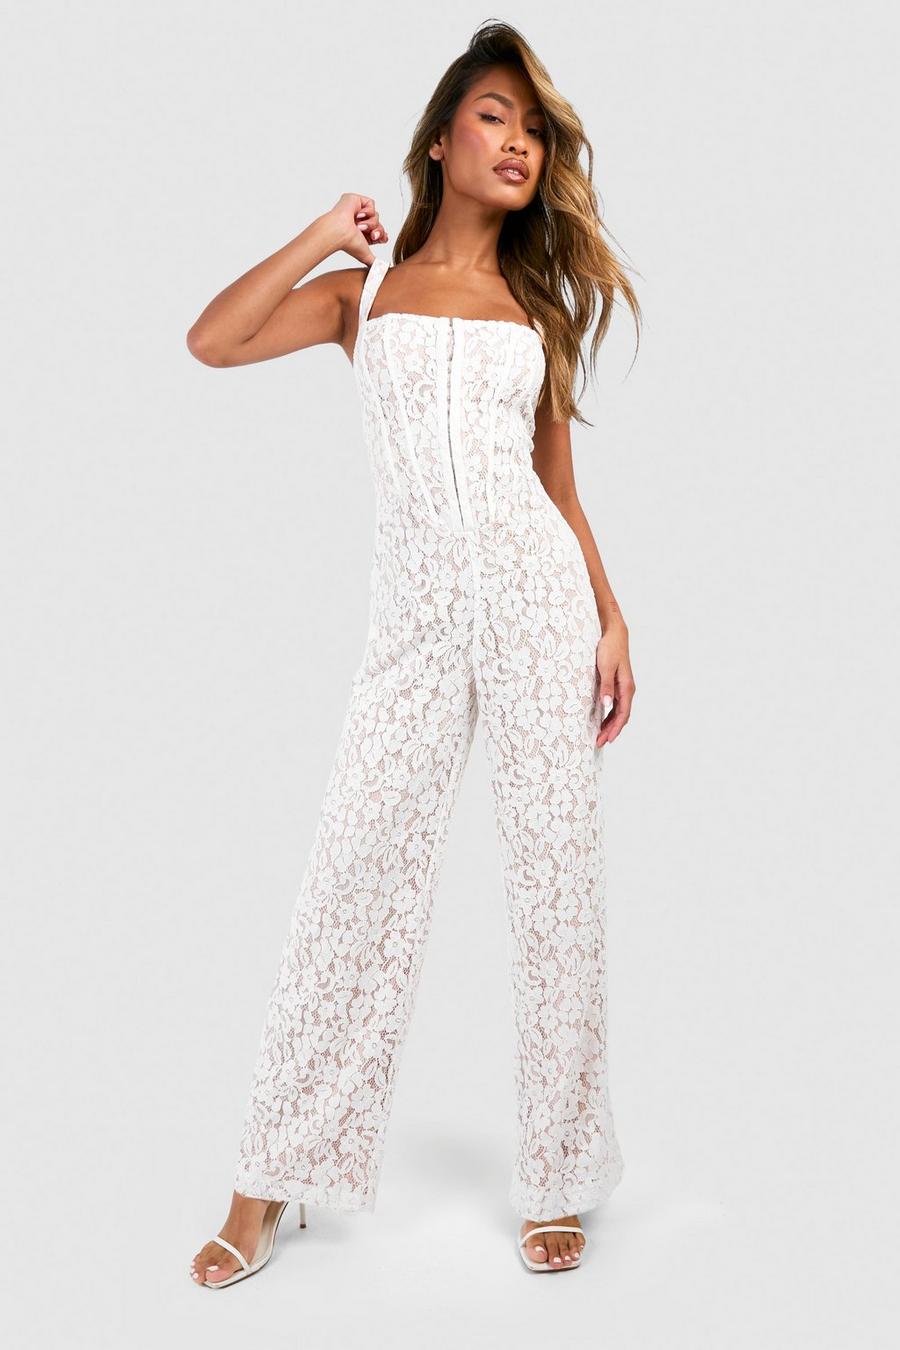 White Jumpsuits & Playsuits